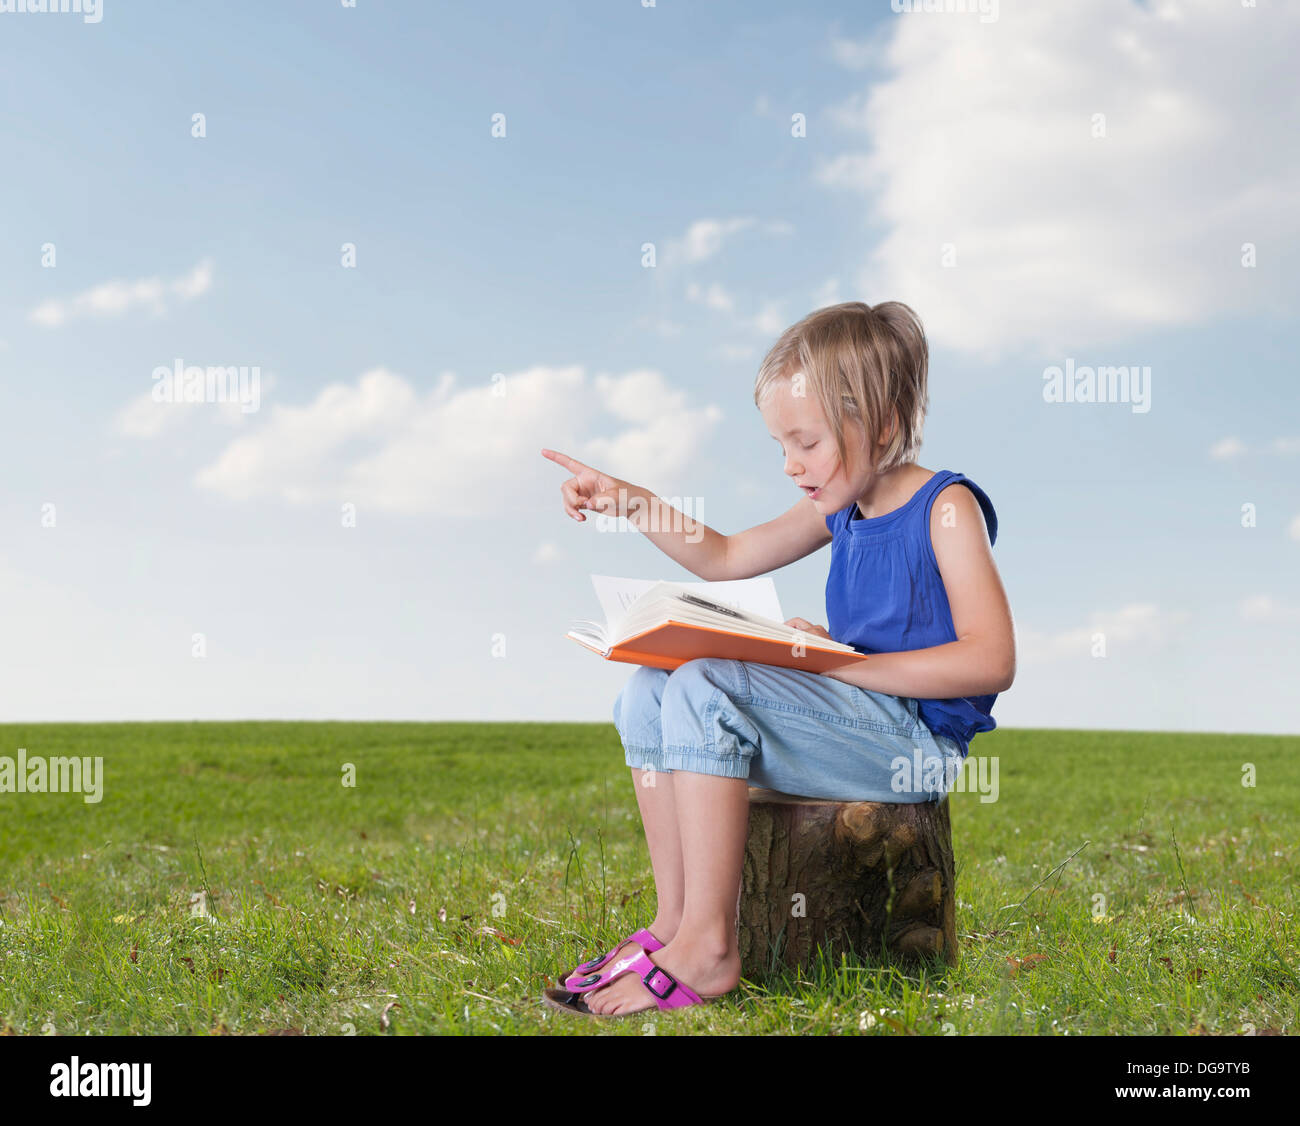 little girl with a book telling a story, outdoors Stock Photo